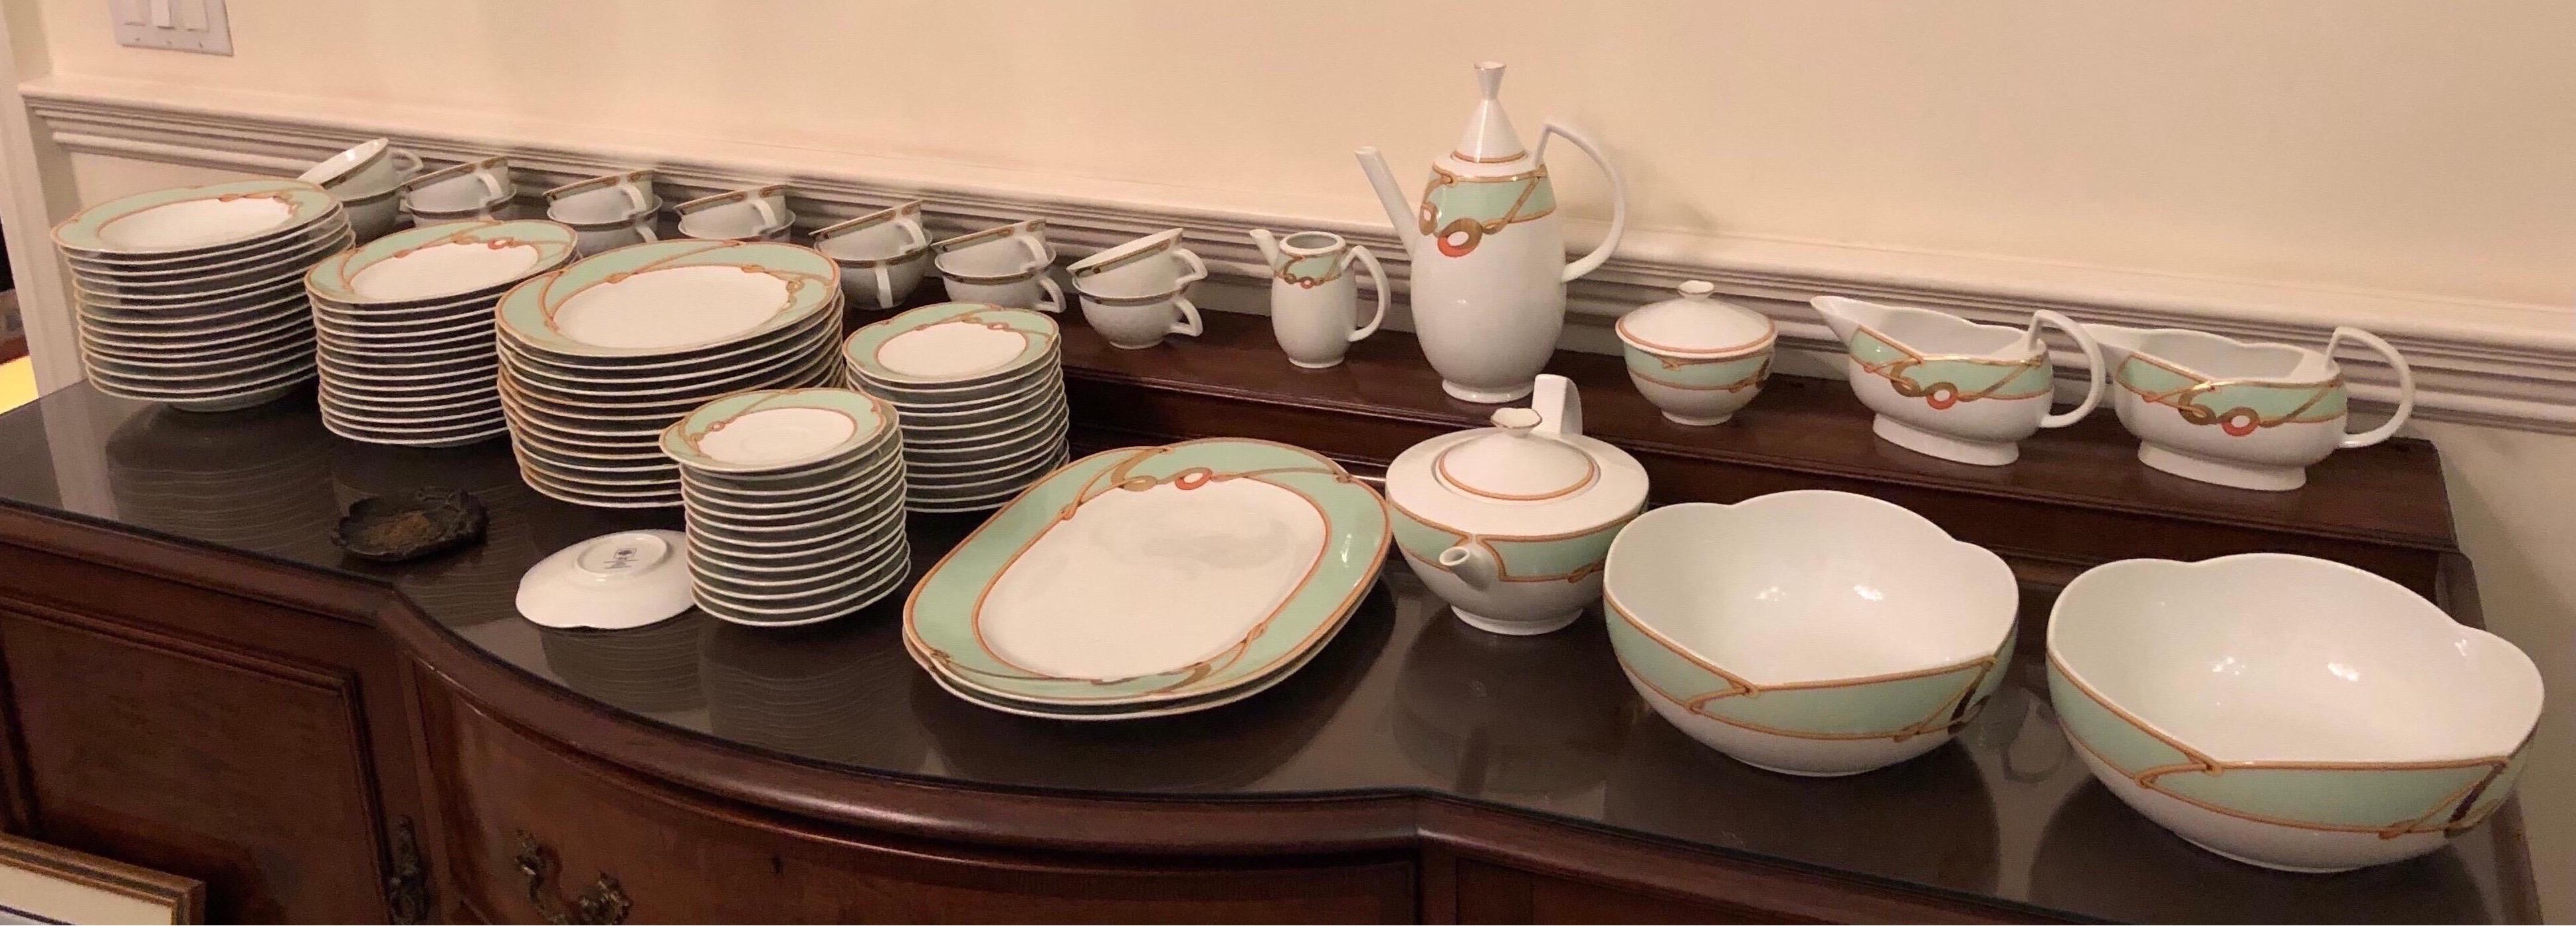 Richard Ginori 105 Piece Porcelain with Light Green Band and Gold Ropes
7 Piece Place Settings To include.. Coffee Pot, Tea Pot, Cream and Sugar…Two Platters Two Open Serving Dishes..Two Gravy Boats…13 Dinner..14 Lunch..14 Soup 12 Salad..14 Bread &